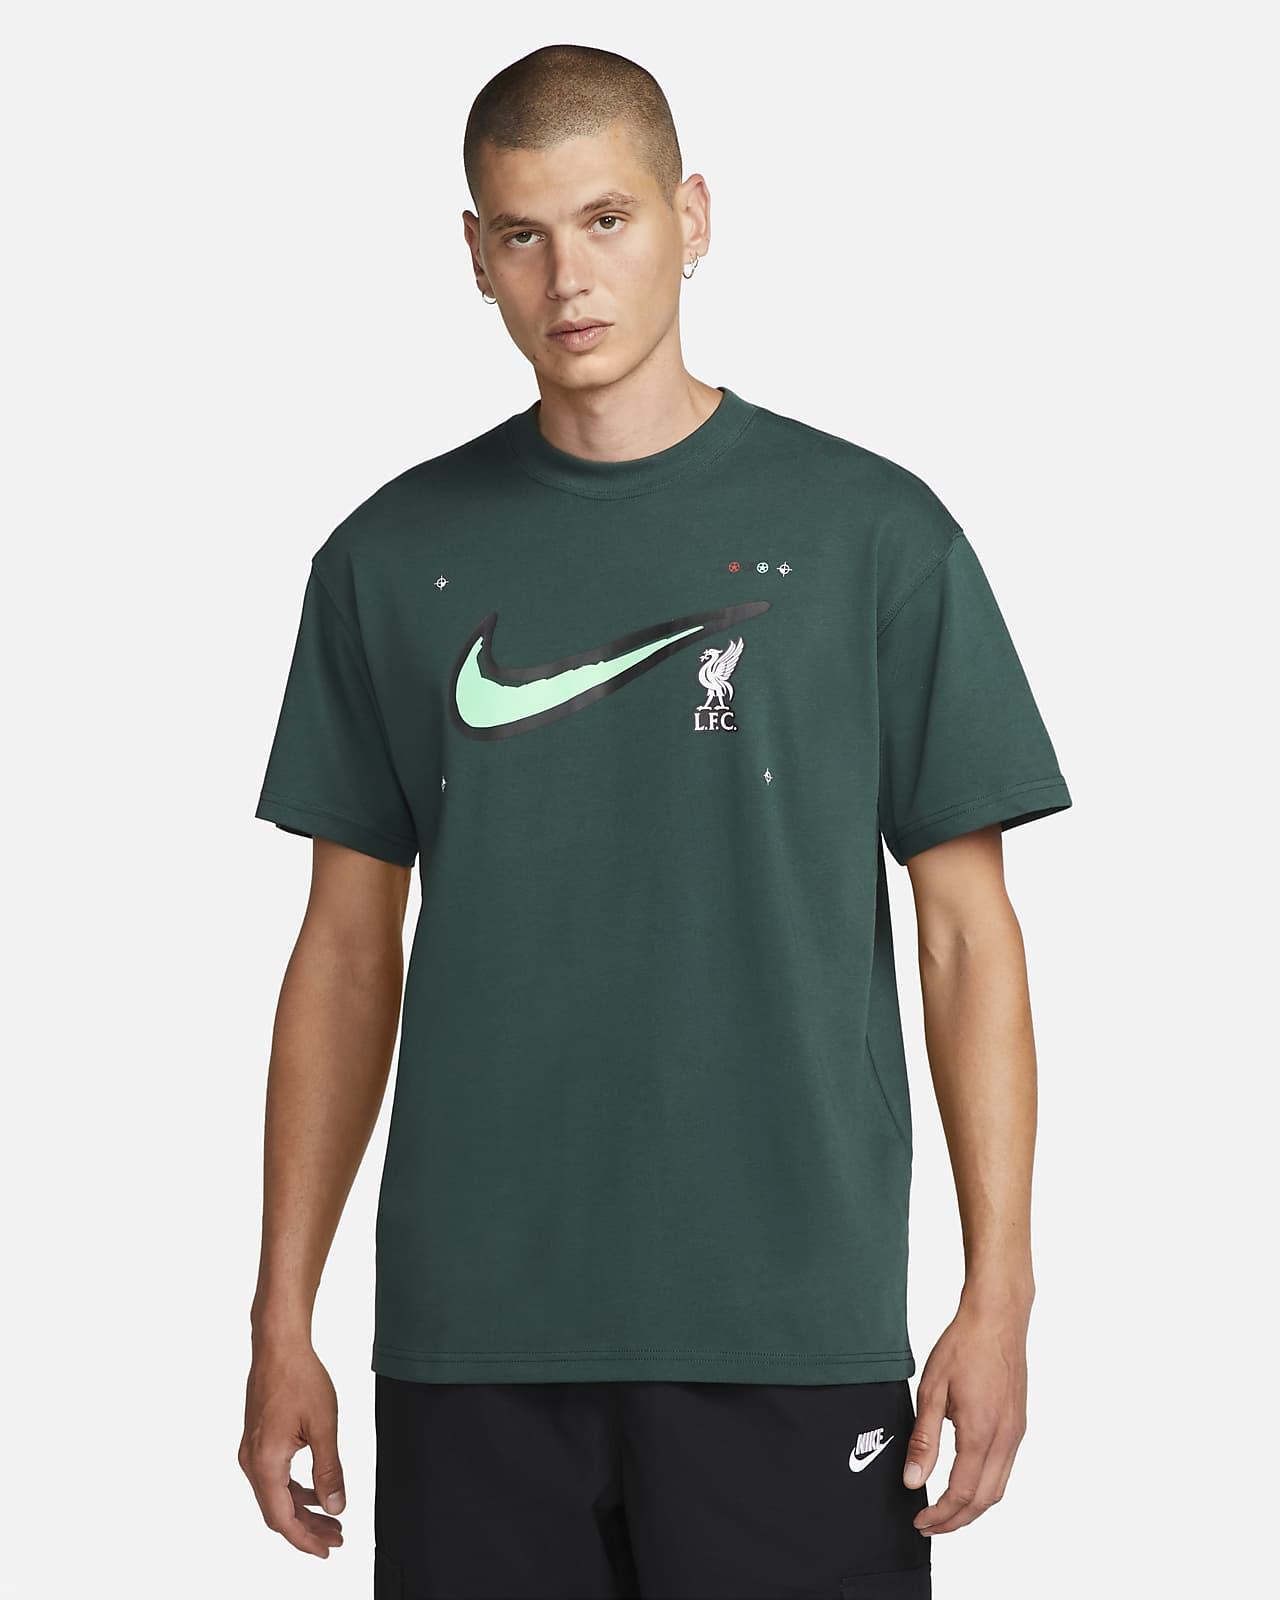 https://static.nike.com/a/images/t_PDP_1280_v1/f_auto,q_auto:eco/f2917b43-5dea-4b39-a4ba-cc7b3f2d7cd5/t-shirt-football-liverpool-fc-max90-pour-WwHRlP.png